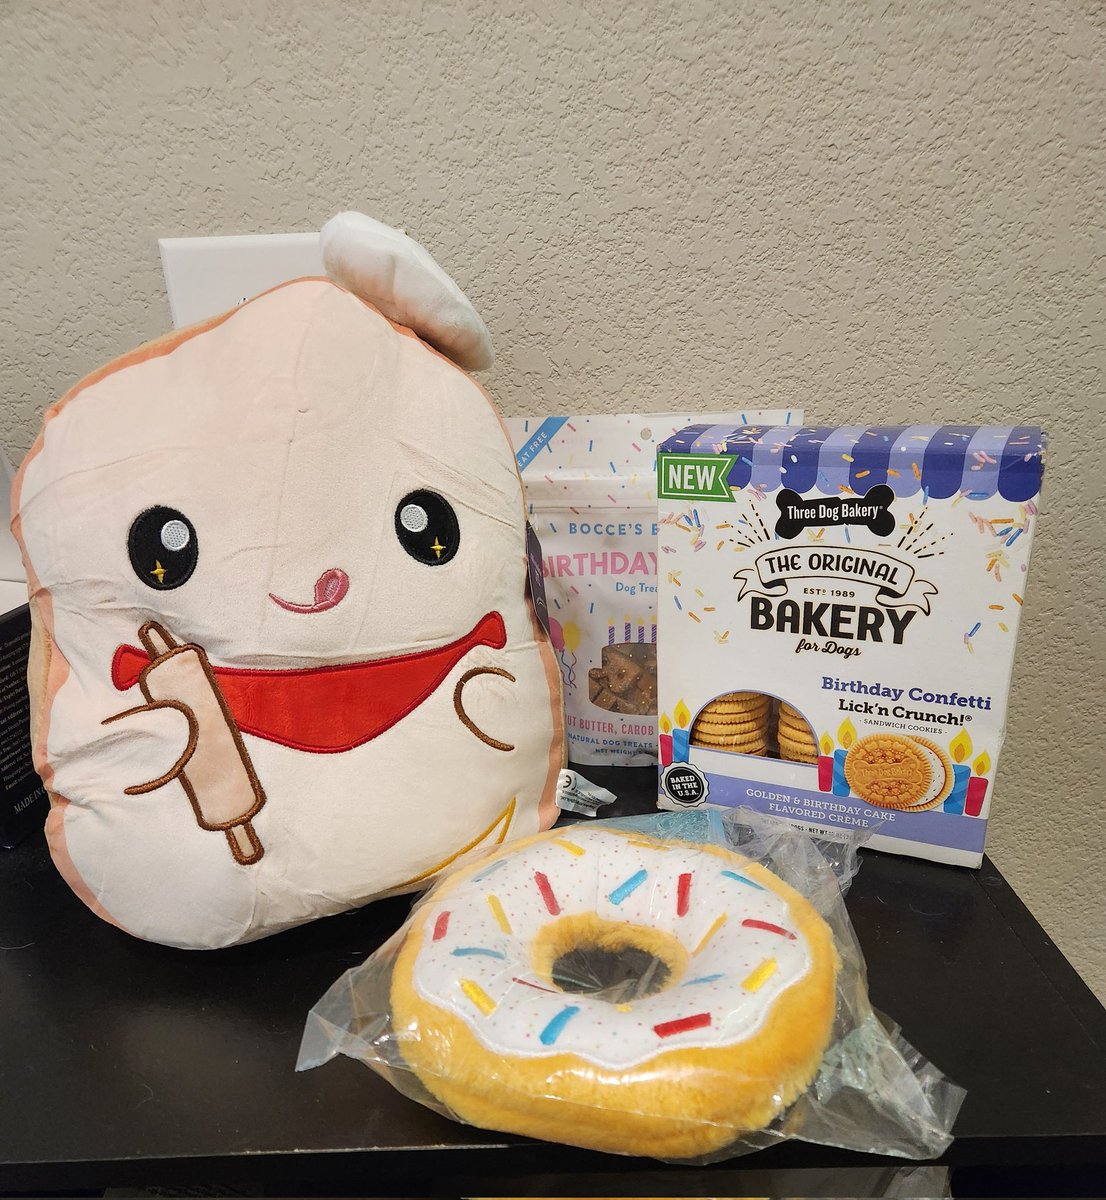 Hello. It my BIRTHDAY! I got a donut! I 13 tuhday and so excited! I got cookies too and a bread pillow cause I love bread! What a cool day! Celebrate wit me by eating a lot please.
Thankoo 

#dogoftheday 
#dogsoftwitter 
#dogsofx